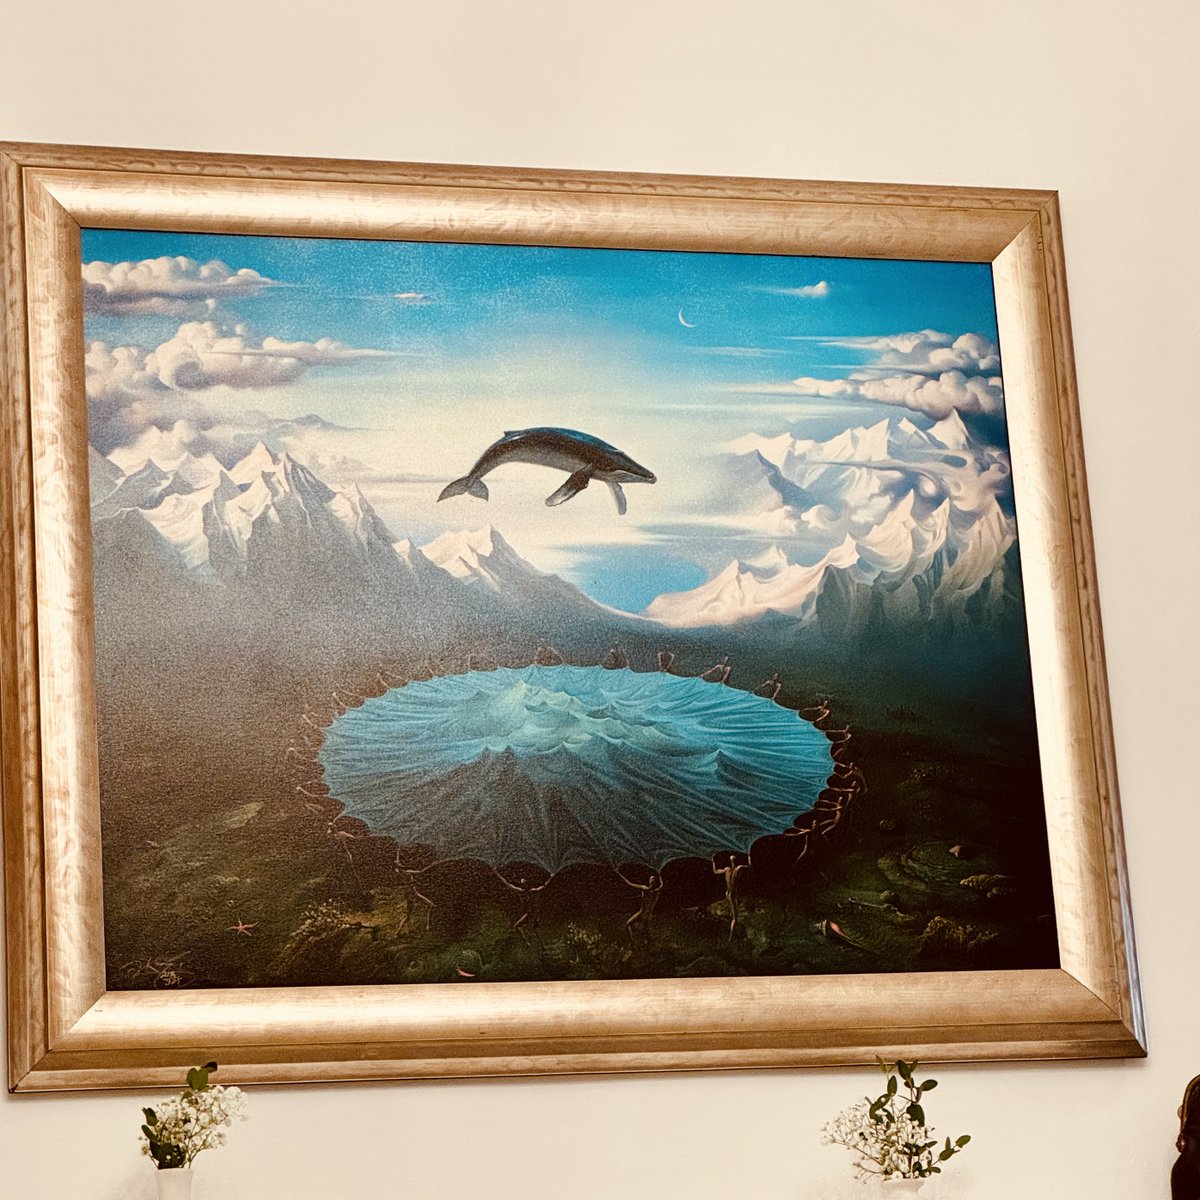 Royal Frenchmen Hotel is a #BoutiqueHotel #Bar with #livemusic #Courtyard and #ArtGallery featuring #KushFineArt by the Master, #VladimirKush #NOLA #FunNOLA